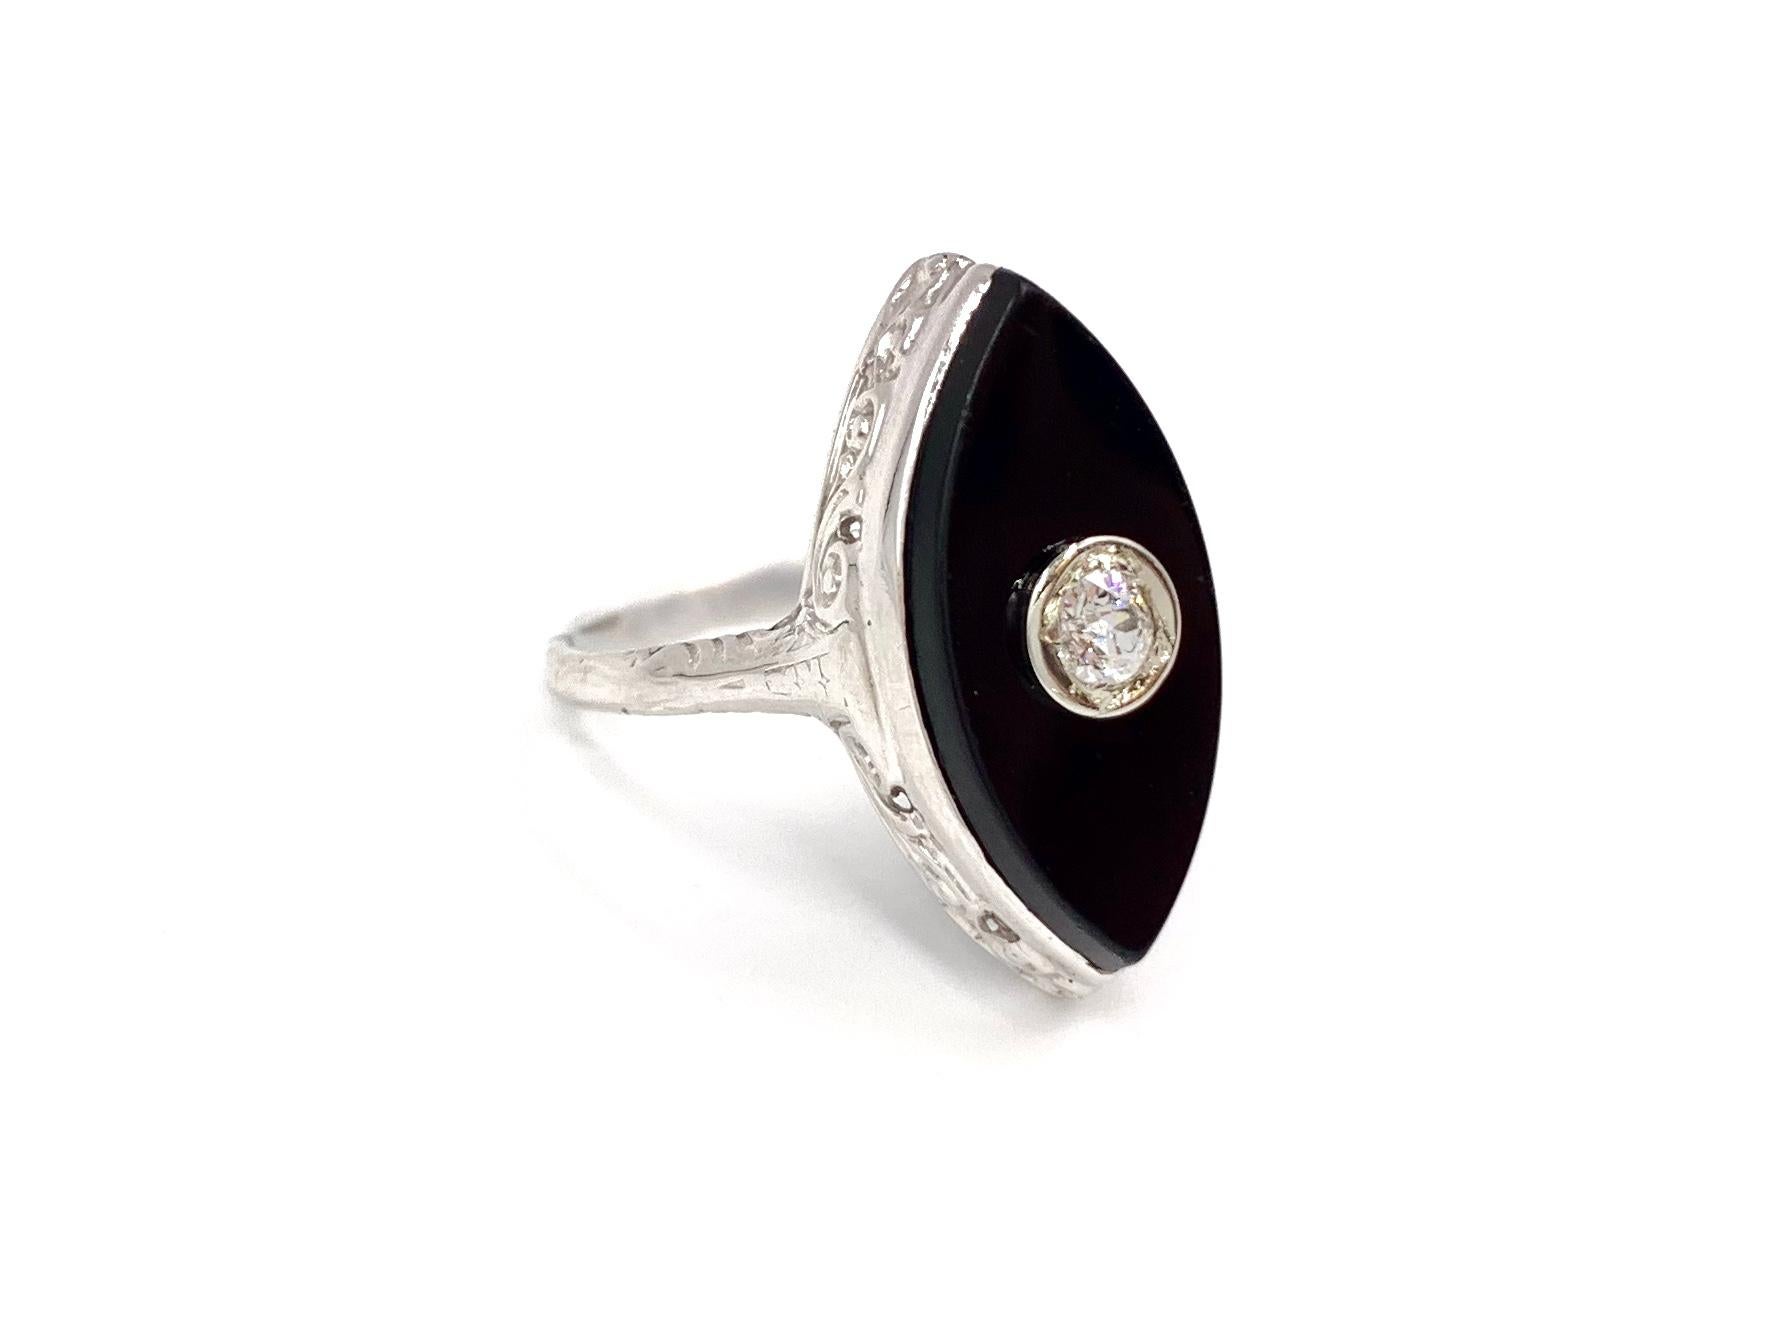 Circa 1950's this unique and fun 14 karat white gold ring features a marquise shaped slice of black onyx with a single bezel set old European cut diamond center. Diamond has an approximate weight of .10 carats at approximately G color, SI1 clarity.